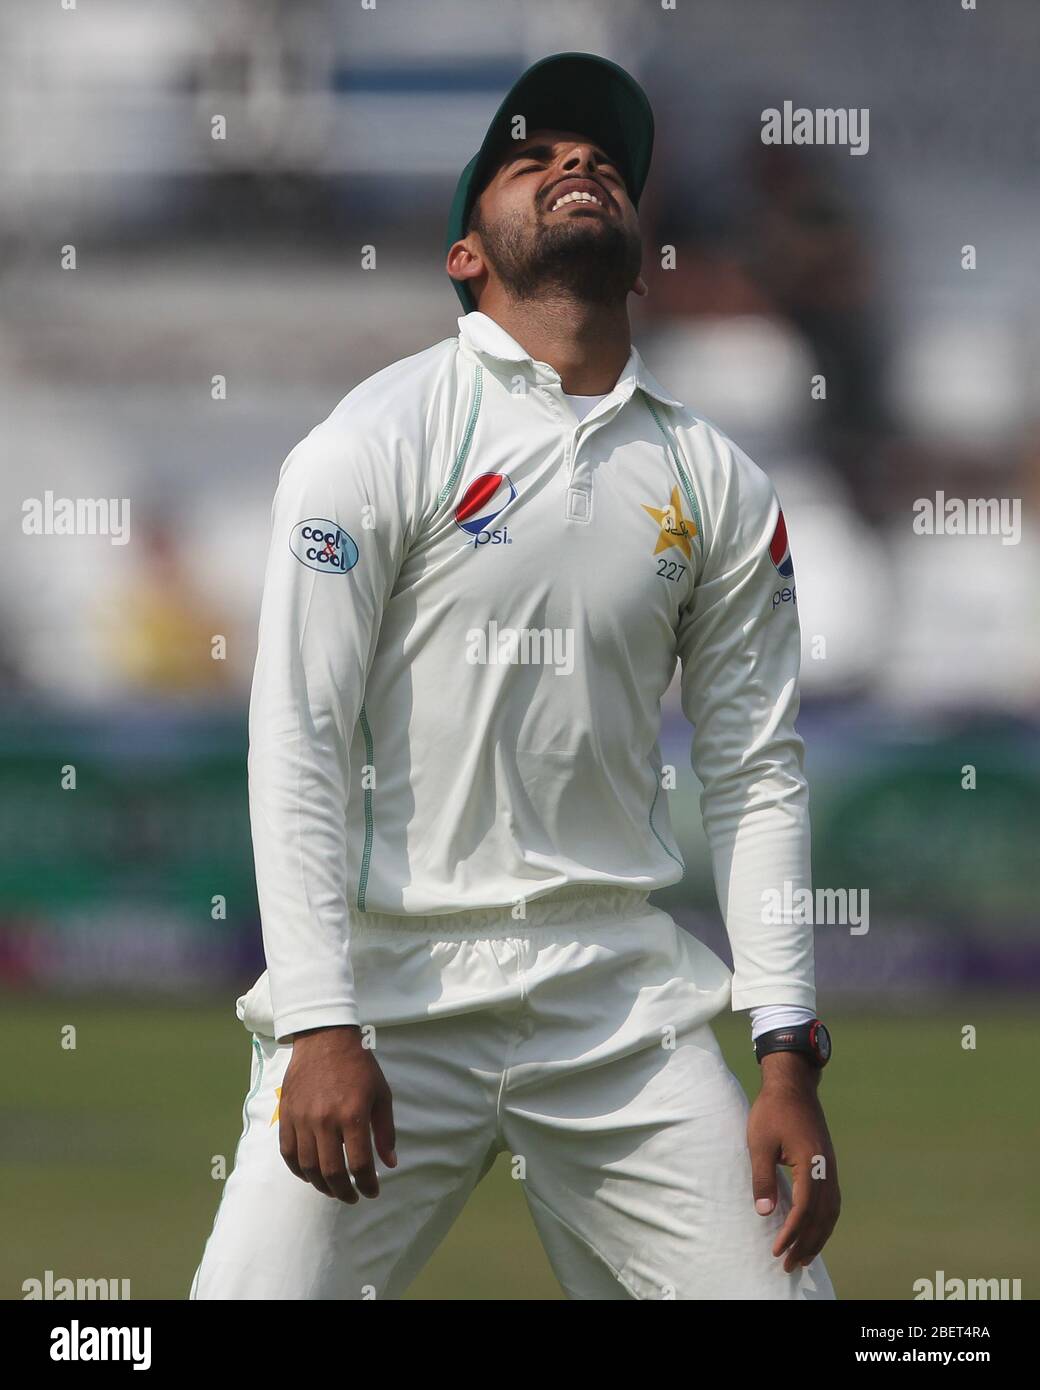 LEEDS, UK - JUNE 1ST Shadab Khan of Pakistan during the first day of the Second Nat West Test match between England and Pakistan at Headingley Cricket Ground, Leeds on Friday 1st June 2018. (Credit: Mark Fletcher | MI News) Stock Photo